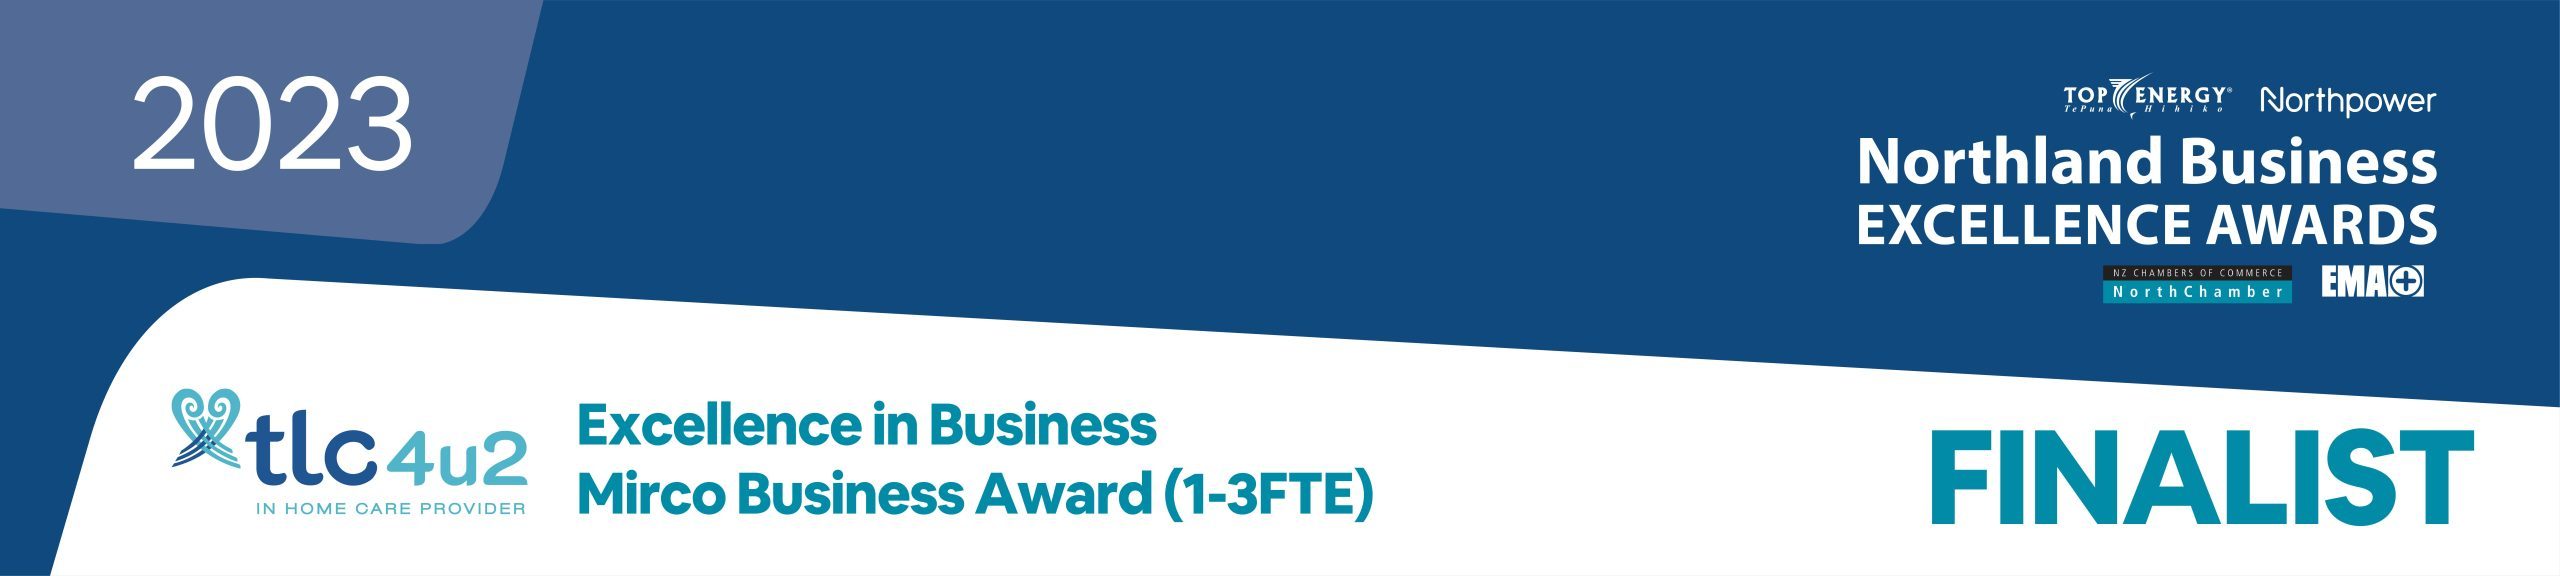 Business Awards Email Signature Finalists-Micro Business (002)